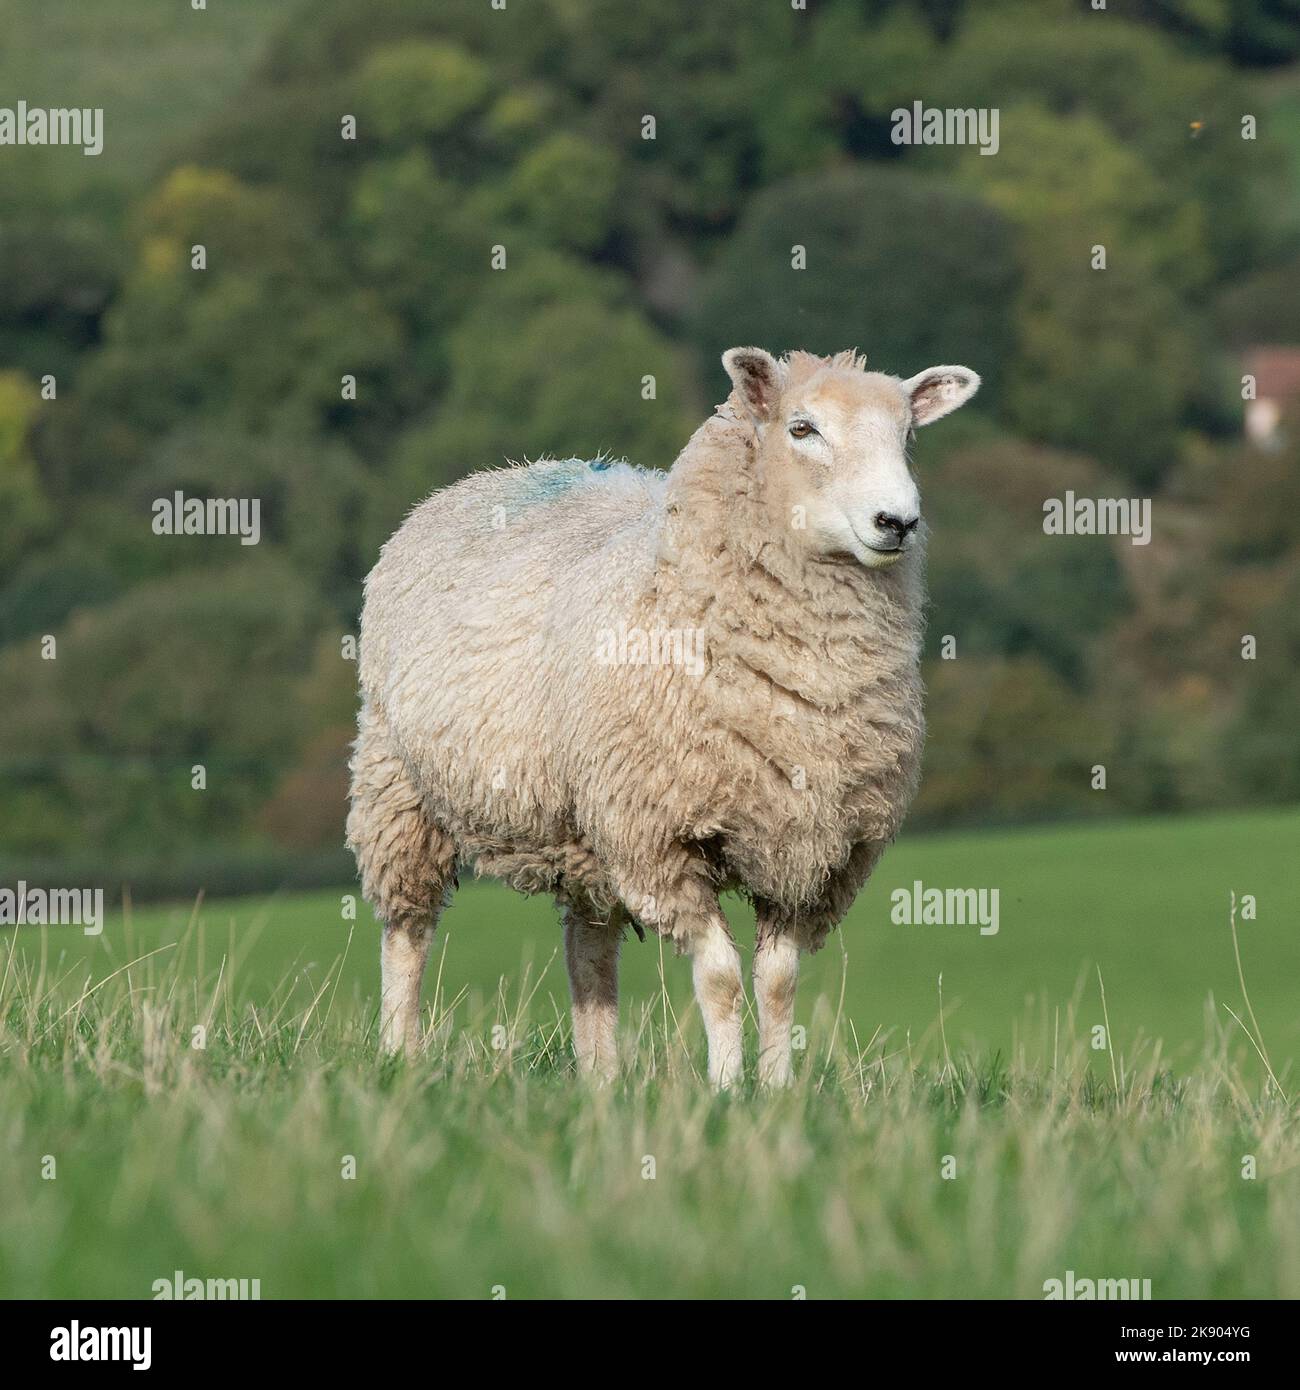 lamb standing in a field Stock Photo